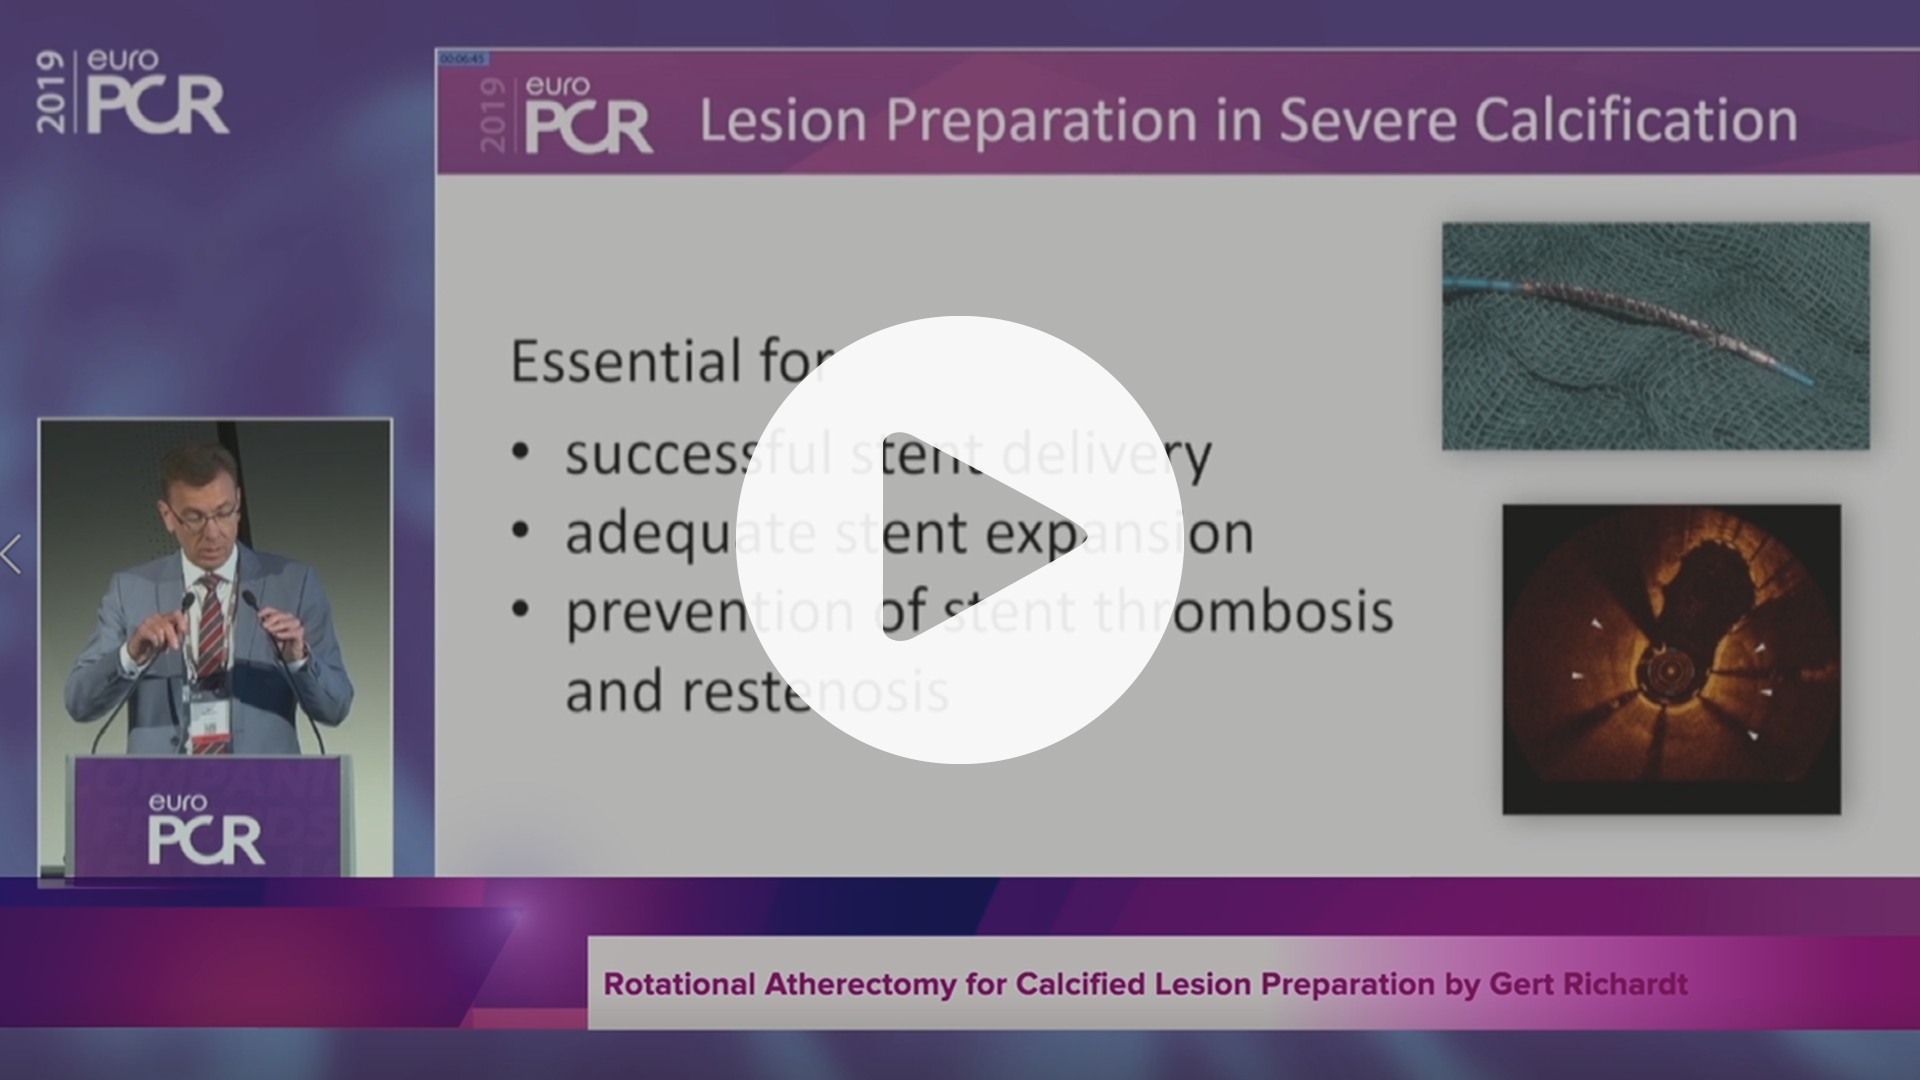 SYNTAX II Rotational Atherectomy for Calcified Lesion Preparation by Gert Richardt, VIdeo